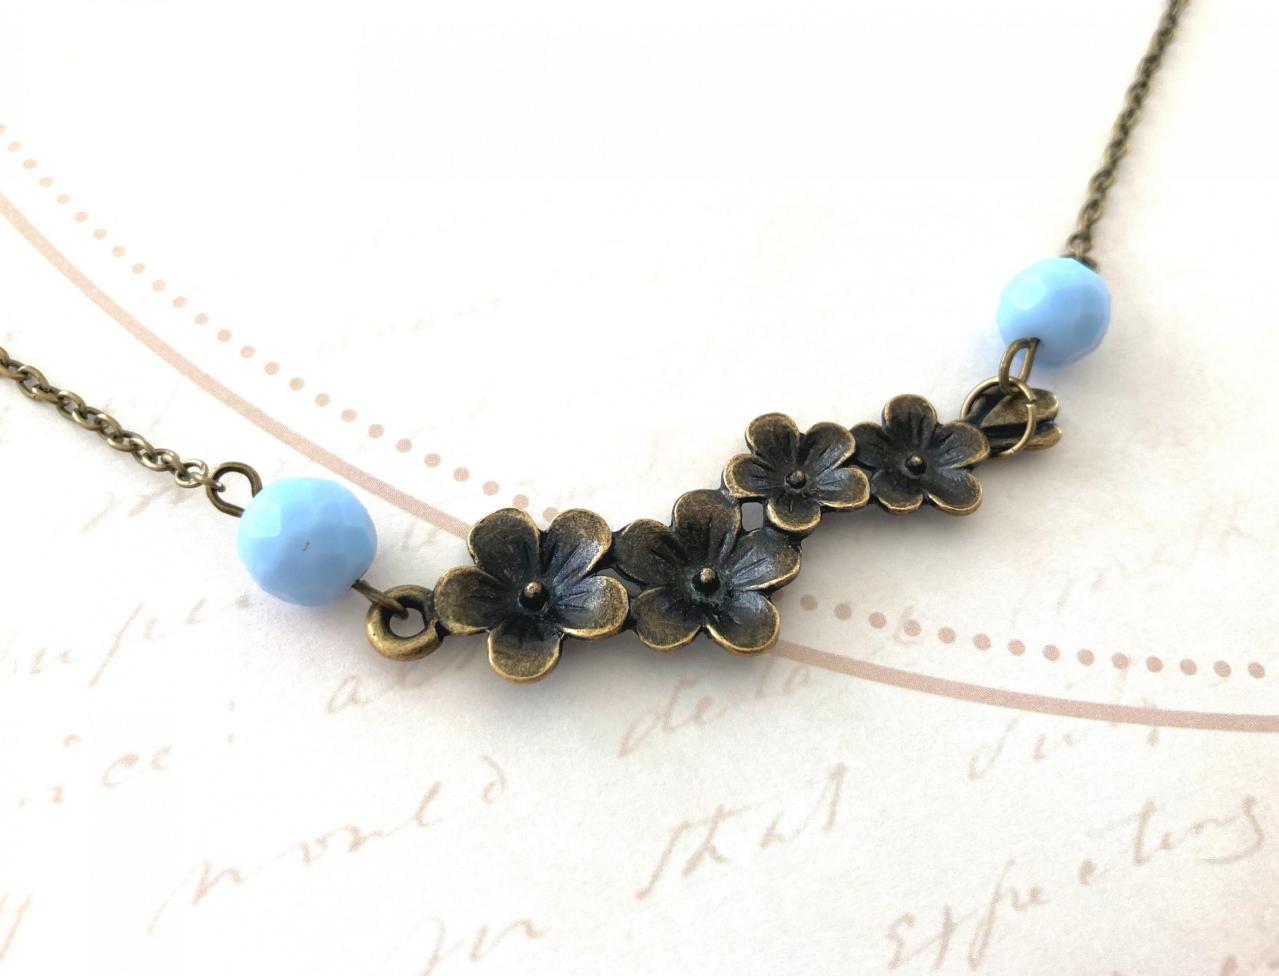 Stunning Flower Necklace With Blue Glass Beads, Selma Dreams